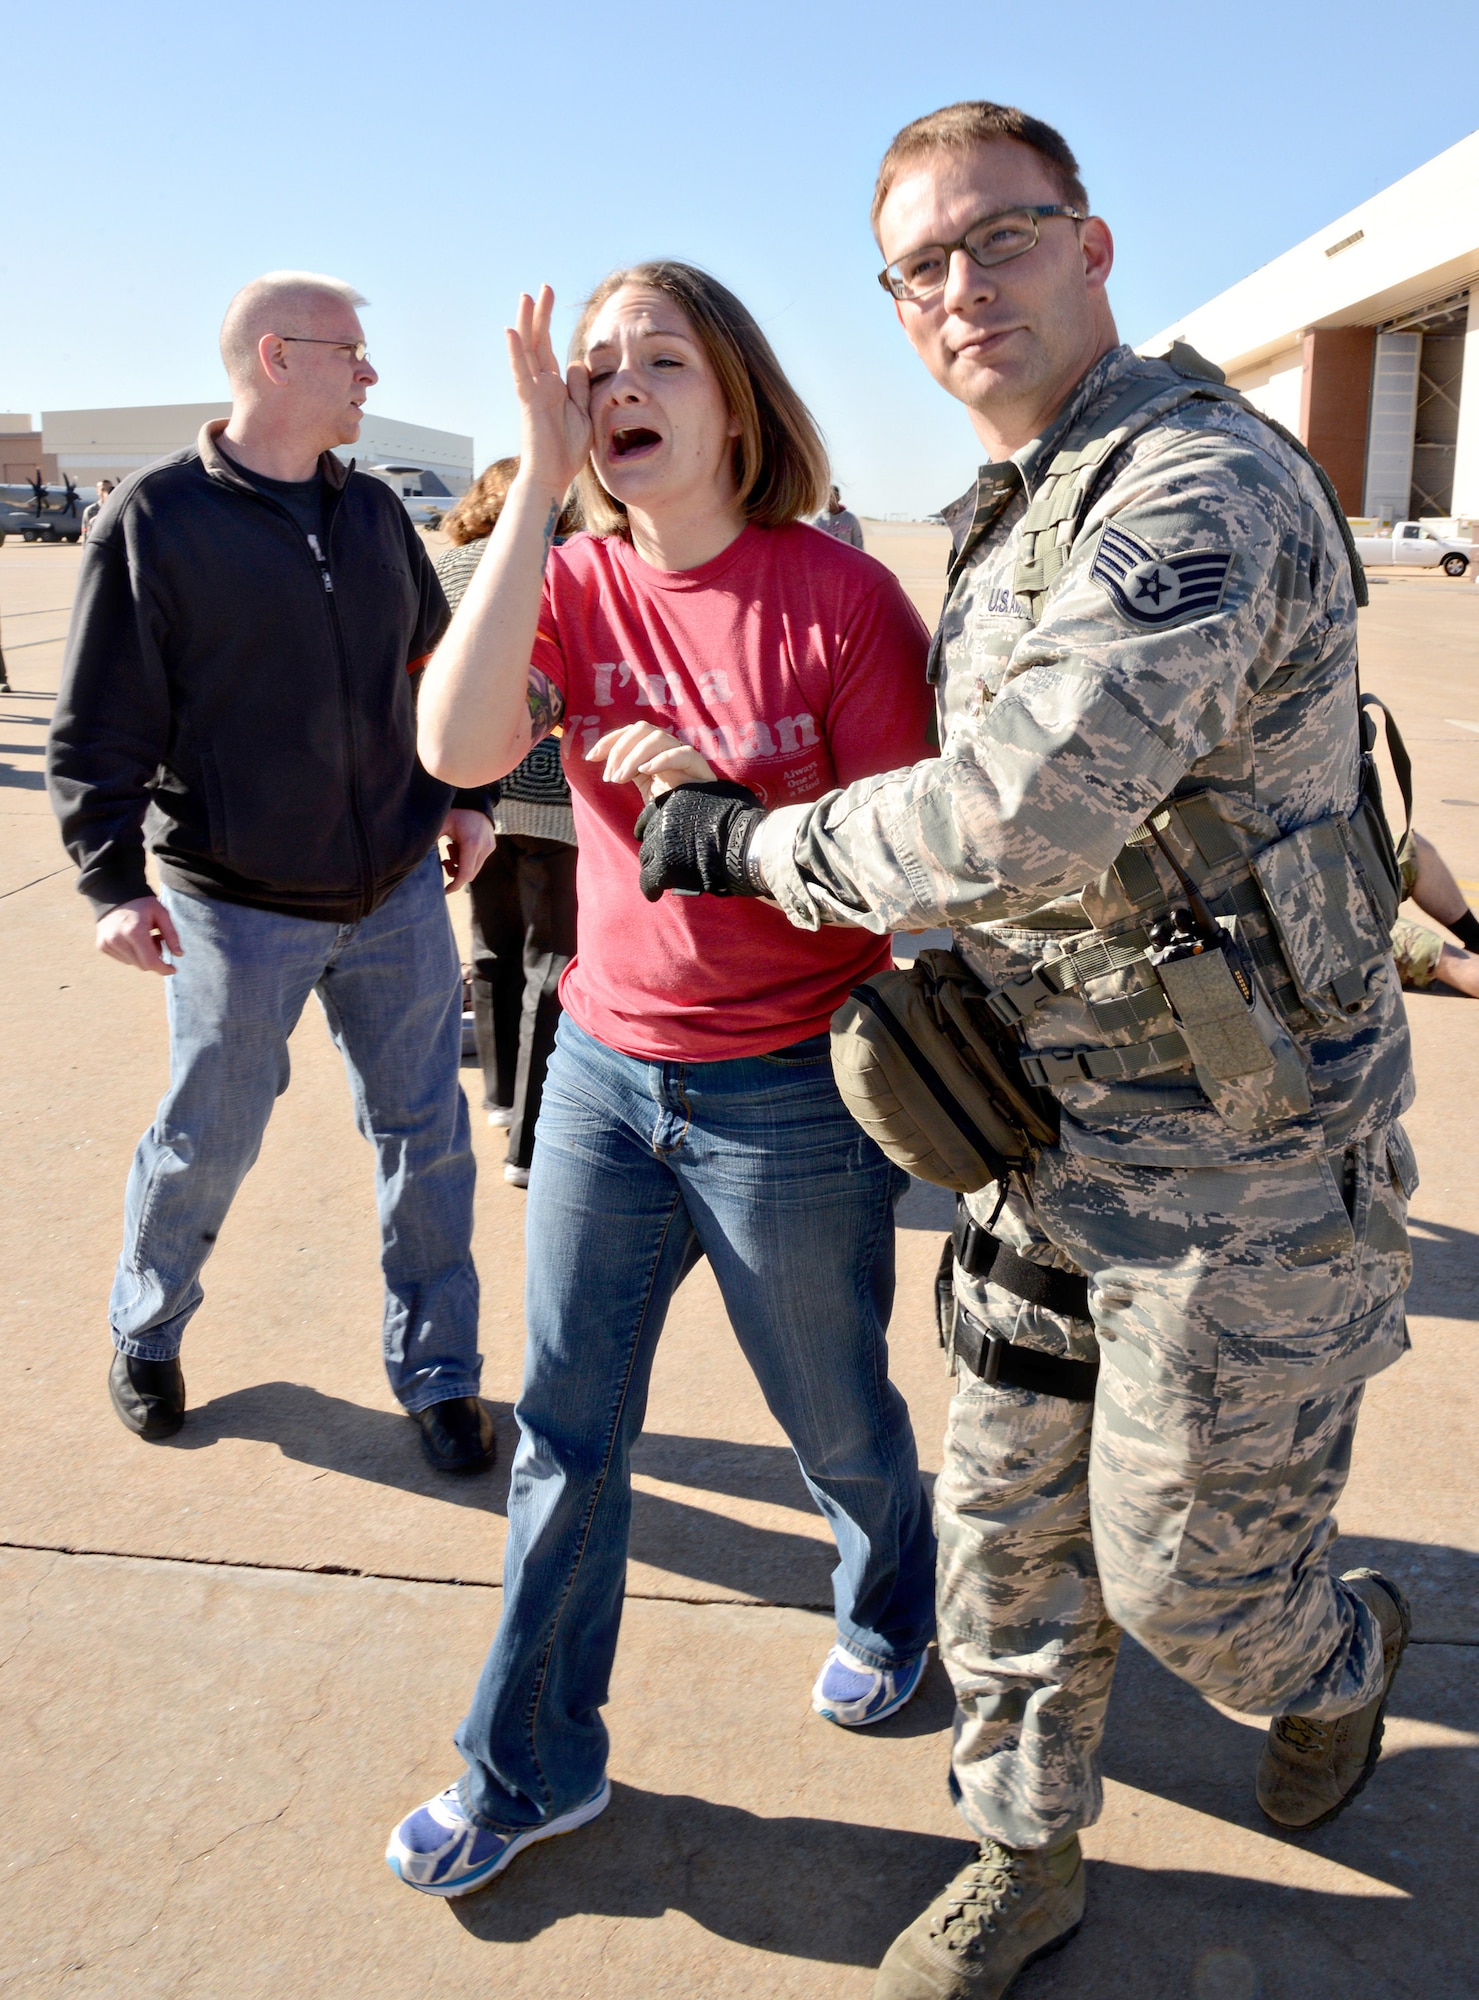 Staff Sgt. Brett Jones, with the 72nd Security Forces Squadron, assists volunteer actor, Master Sgt. Jo DeLorenzi as she looks for her children during the emergency response exercise April 6. (Air Force photo by Kelly White)